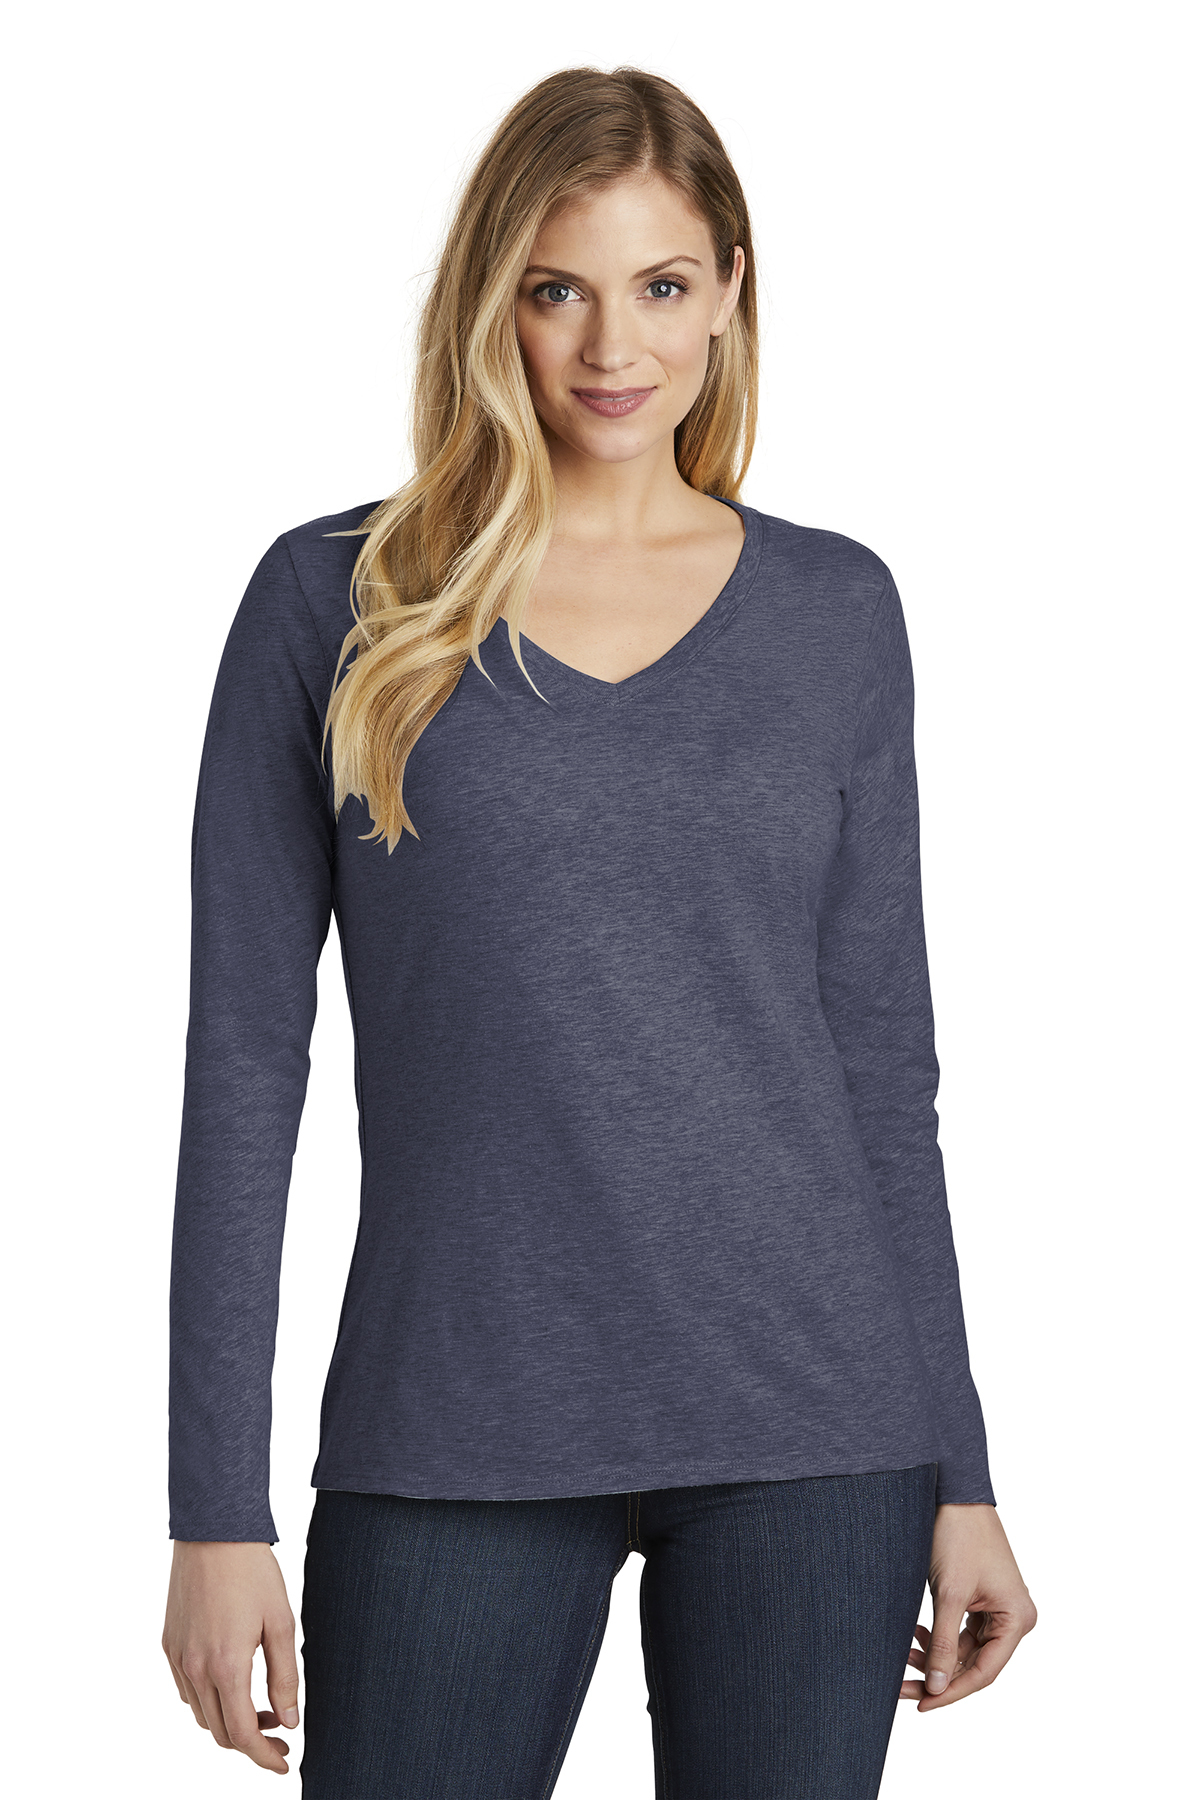 District Women's Very Important Tee Long Sleeve V-Neck, Product